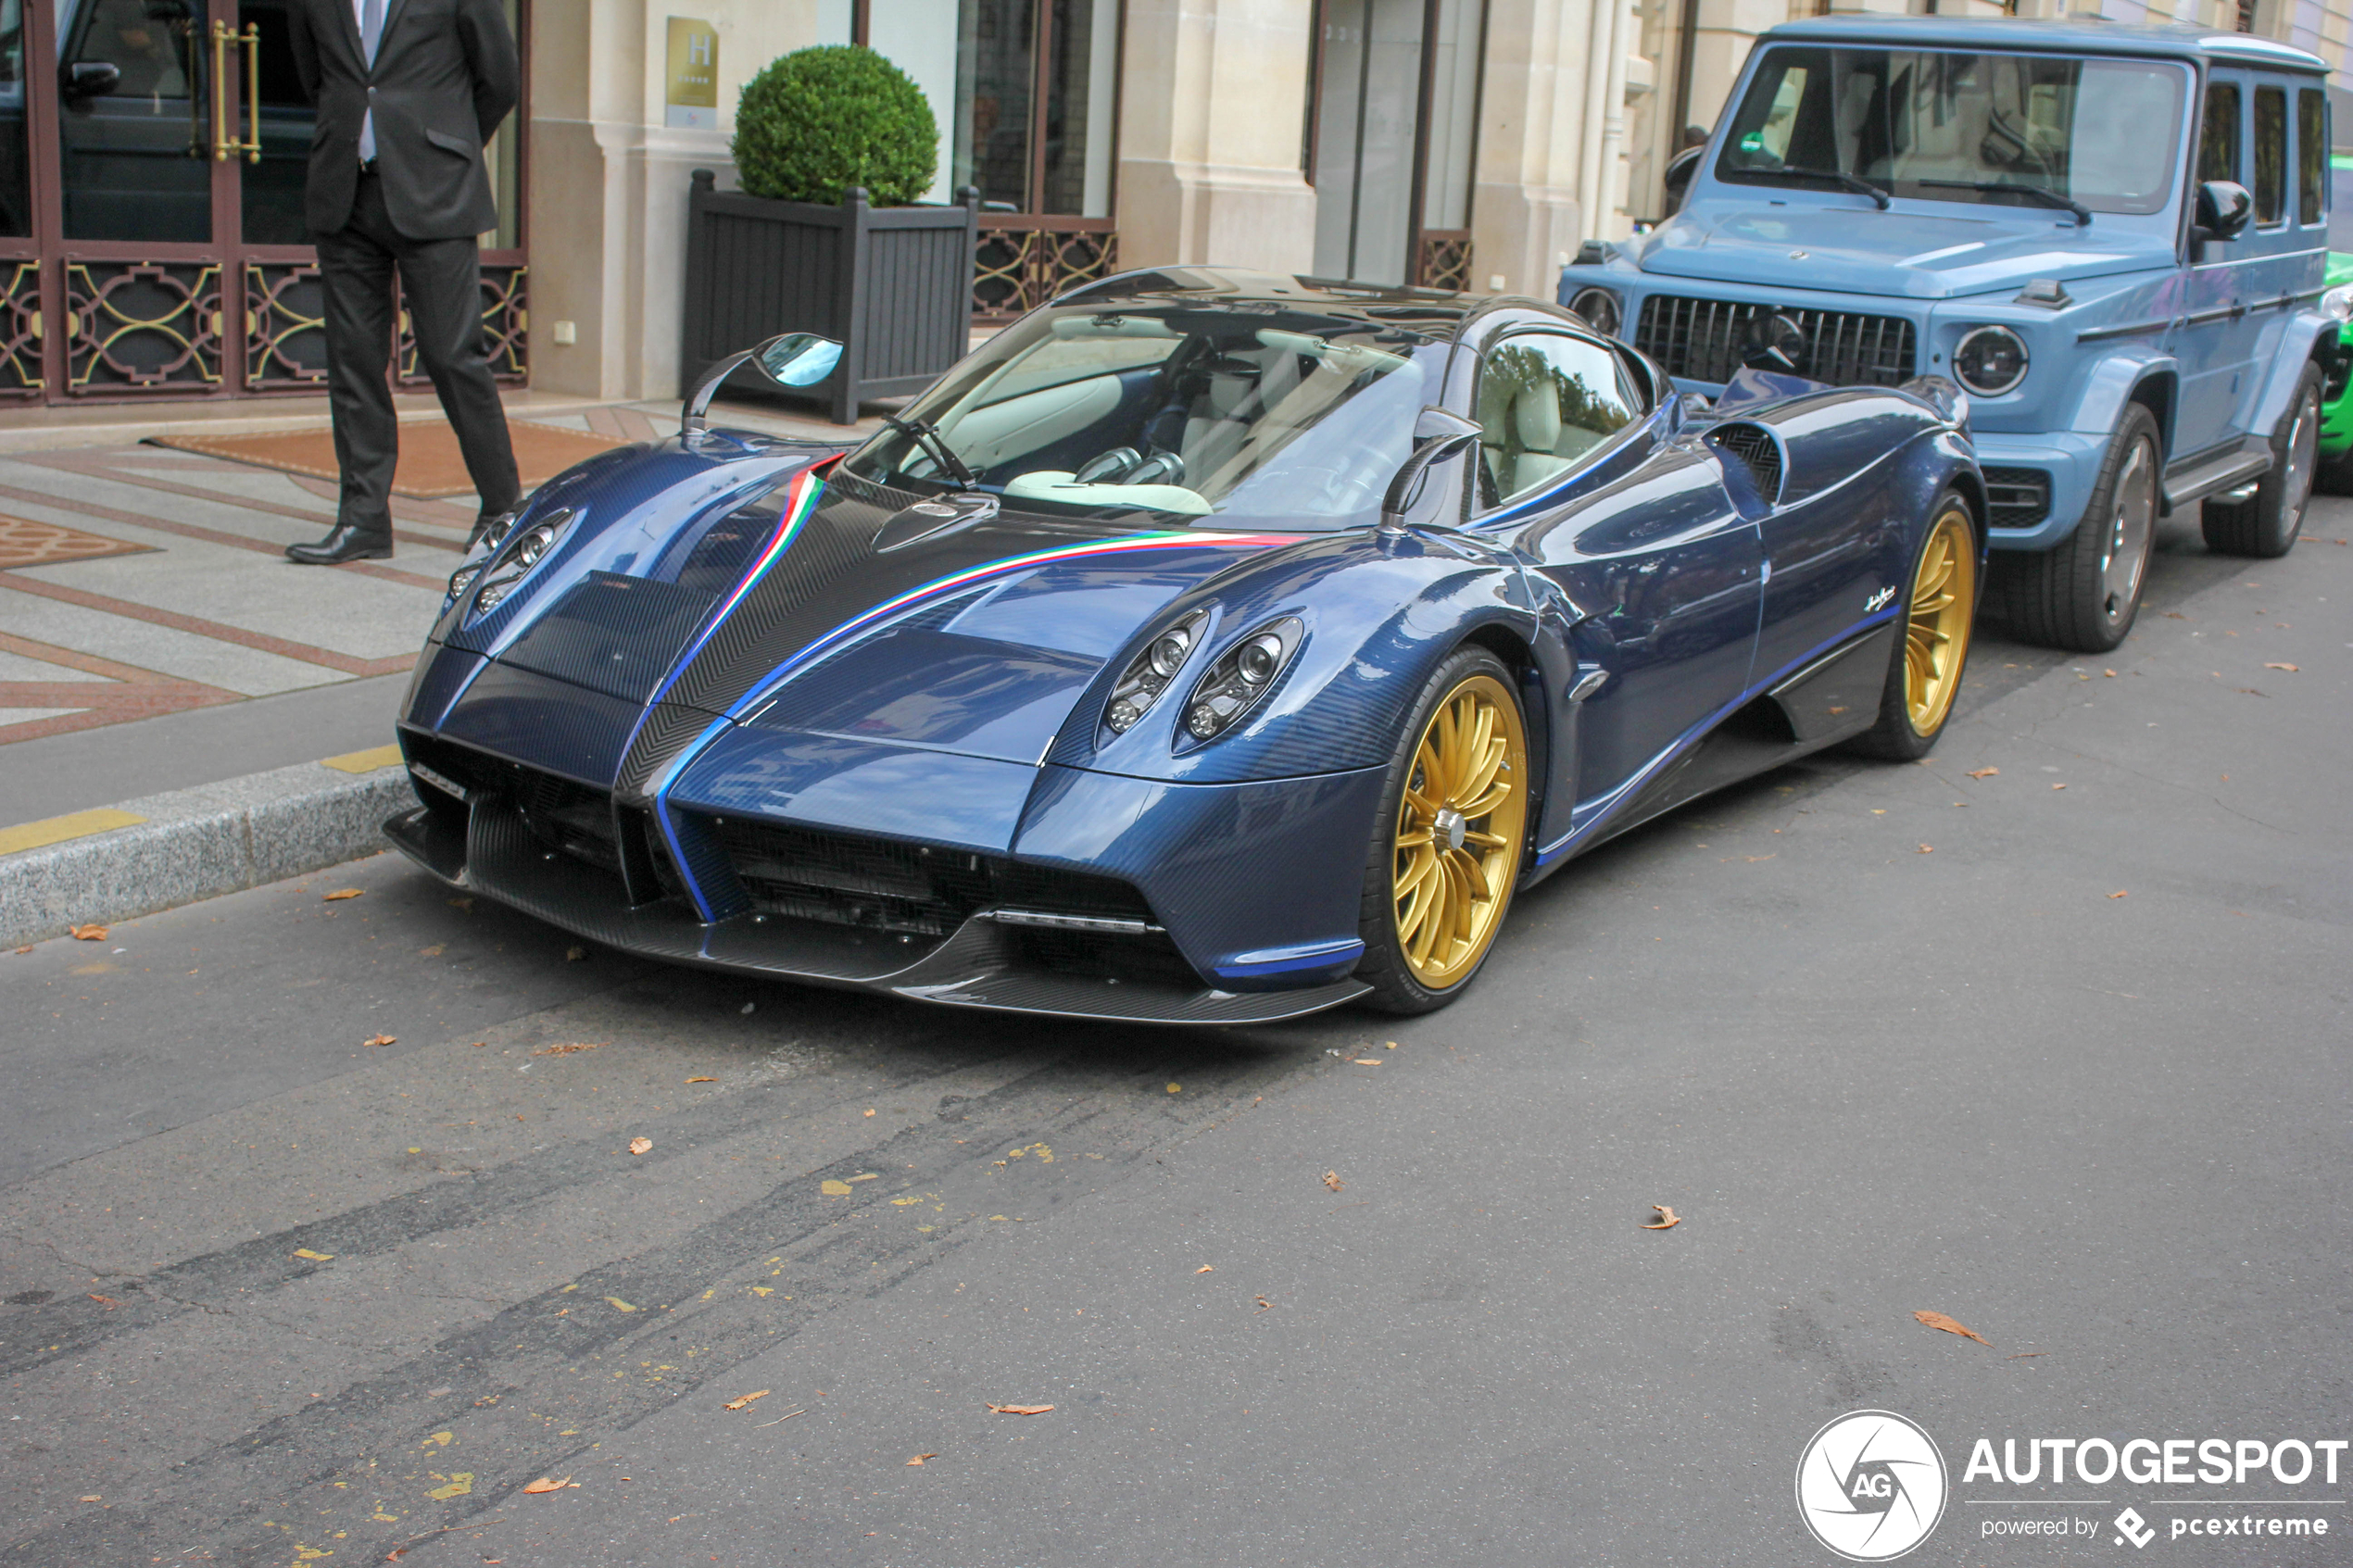 Paganis are also becoming less exclusive